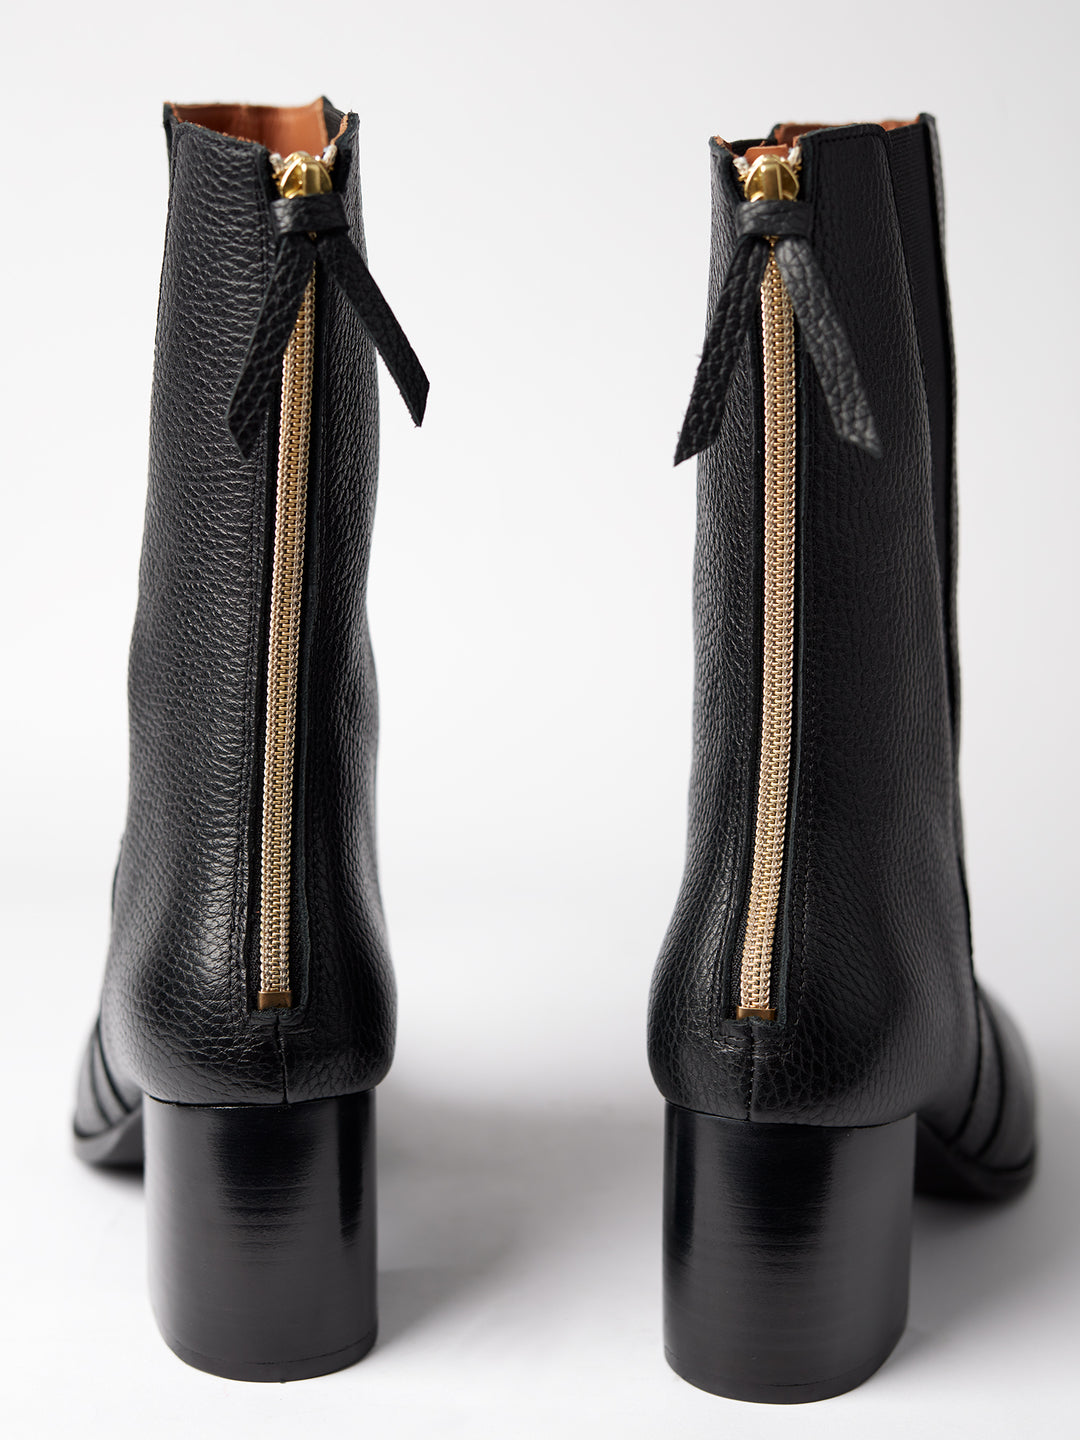 Blankens The Diana black heeled boot with gold detail in the front and zipper in the back detailed picture of the zipper in the back